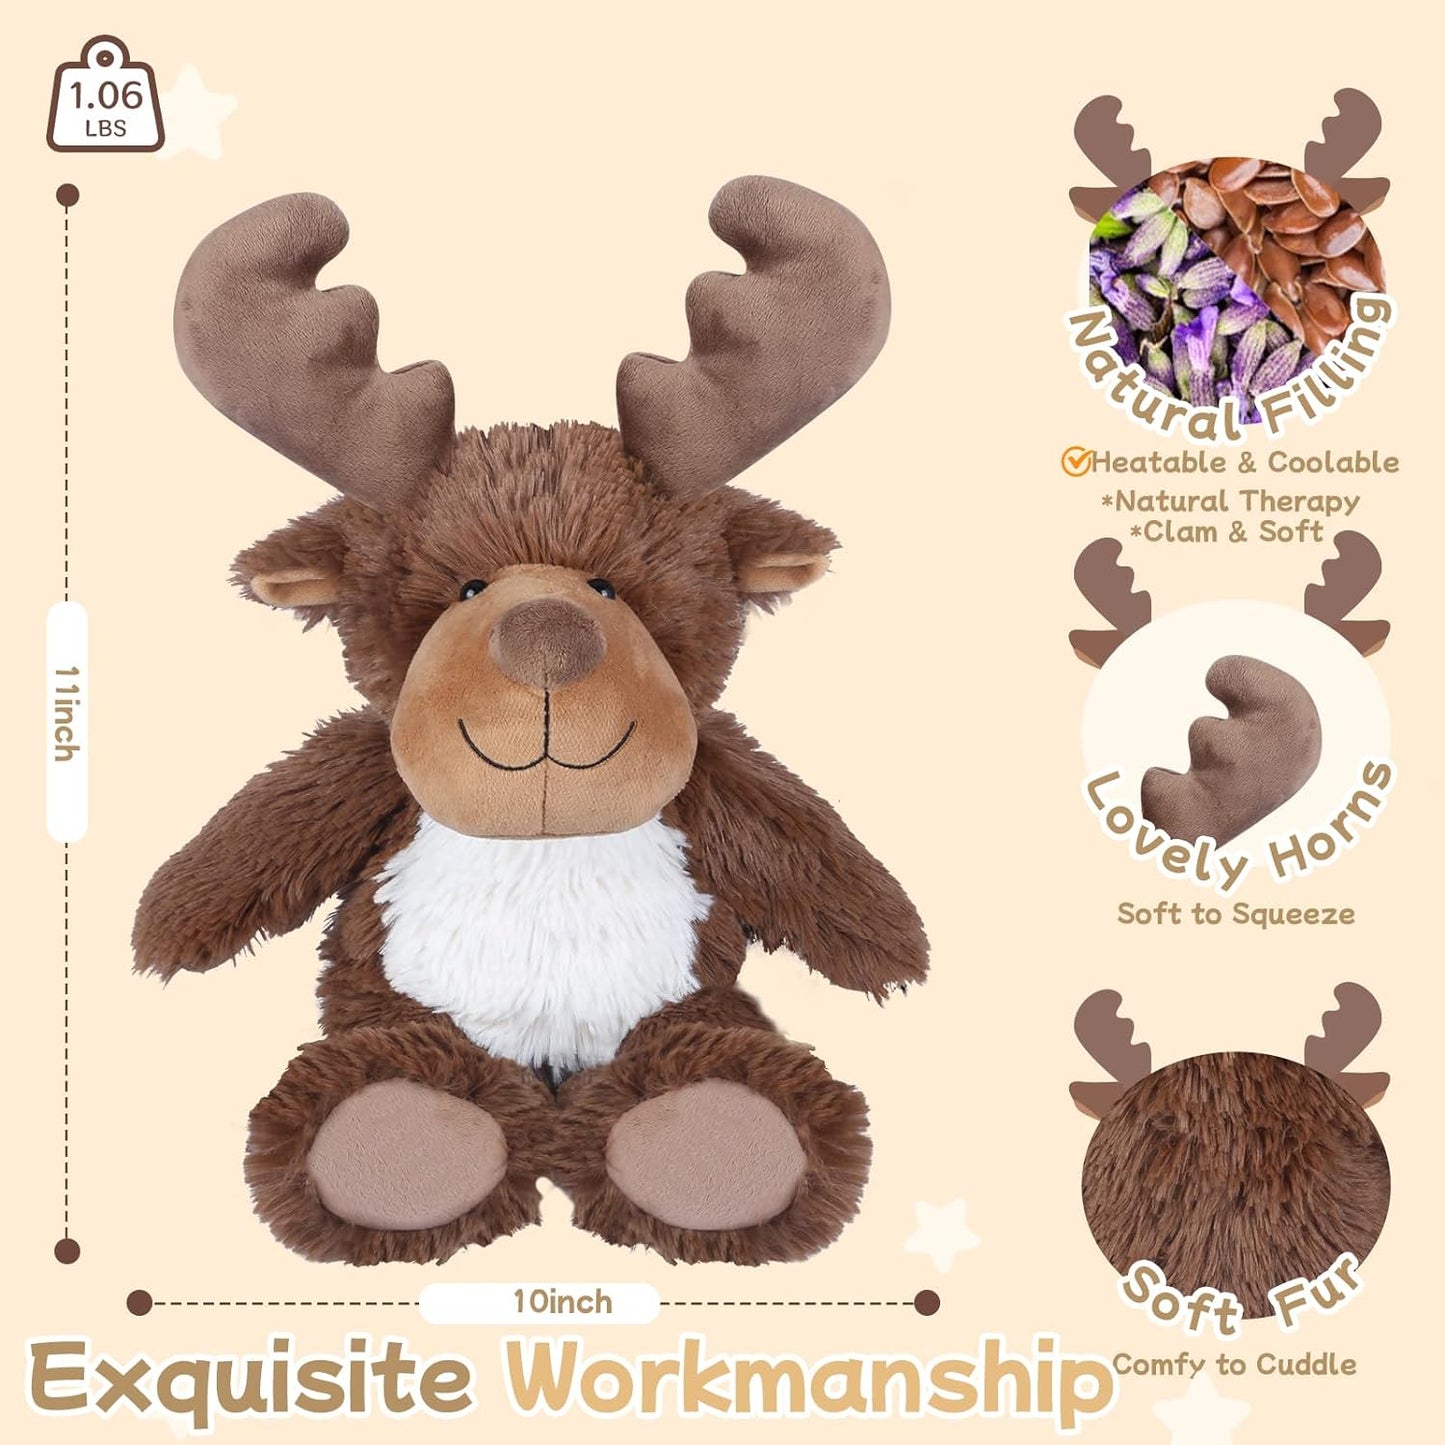 SuzziPals Heatable & Coolable Moose Stuffed Animals, Microwavable Stuffed Animal Heating Pad for Cramps & Pains, Lavender Scent Moose Plush Toys for Anxiety Relief, Christmas Stuffed Animals Gifts